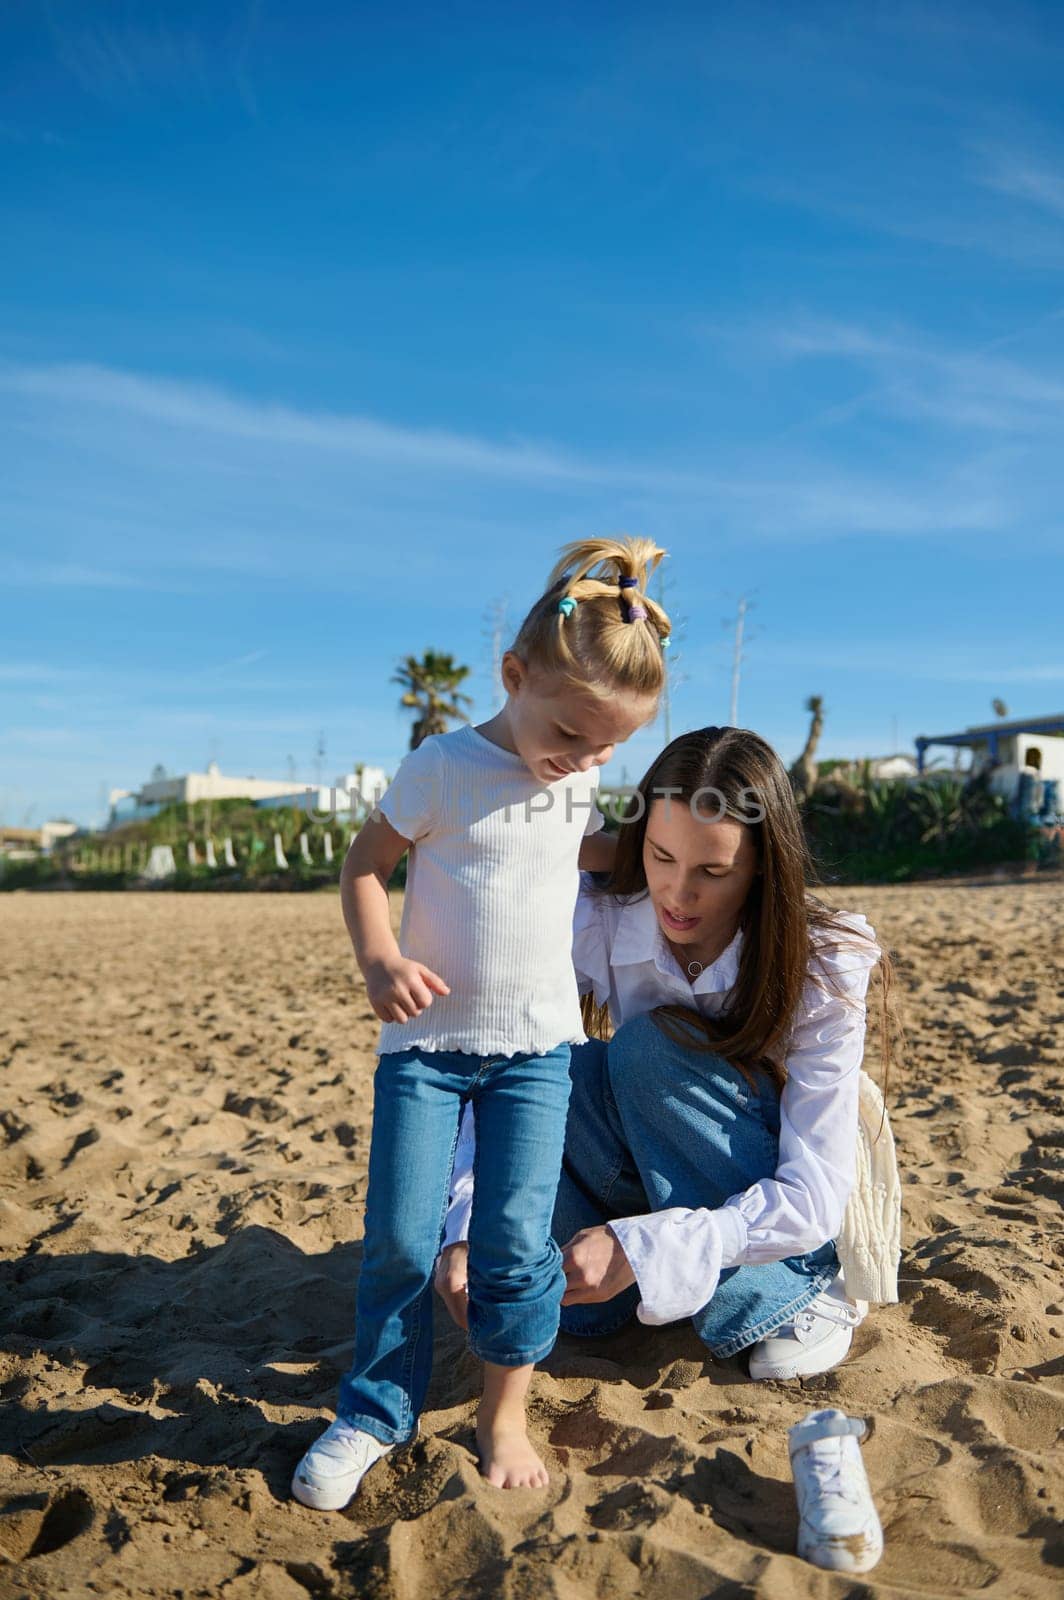 Happy mother and daughter playing together on the beach, building castles from the sand, enjoying nice time outdoor by artgf